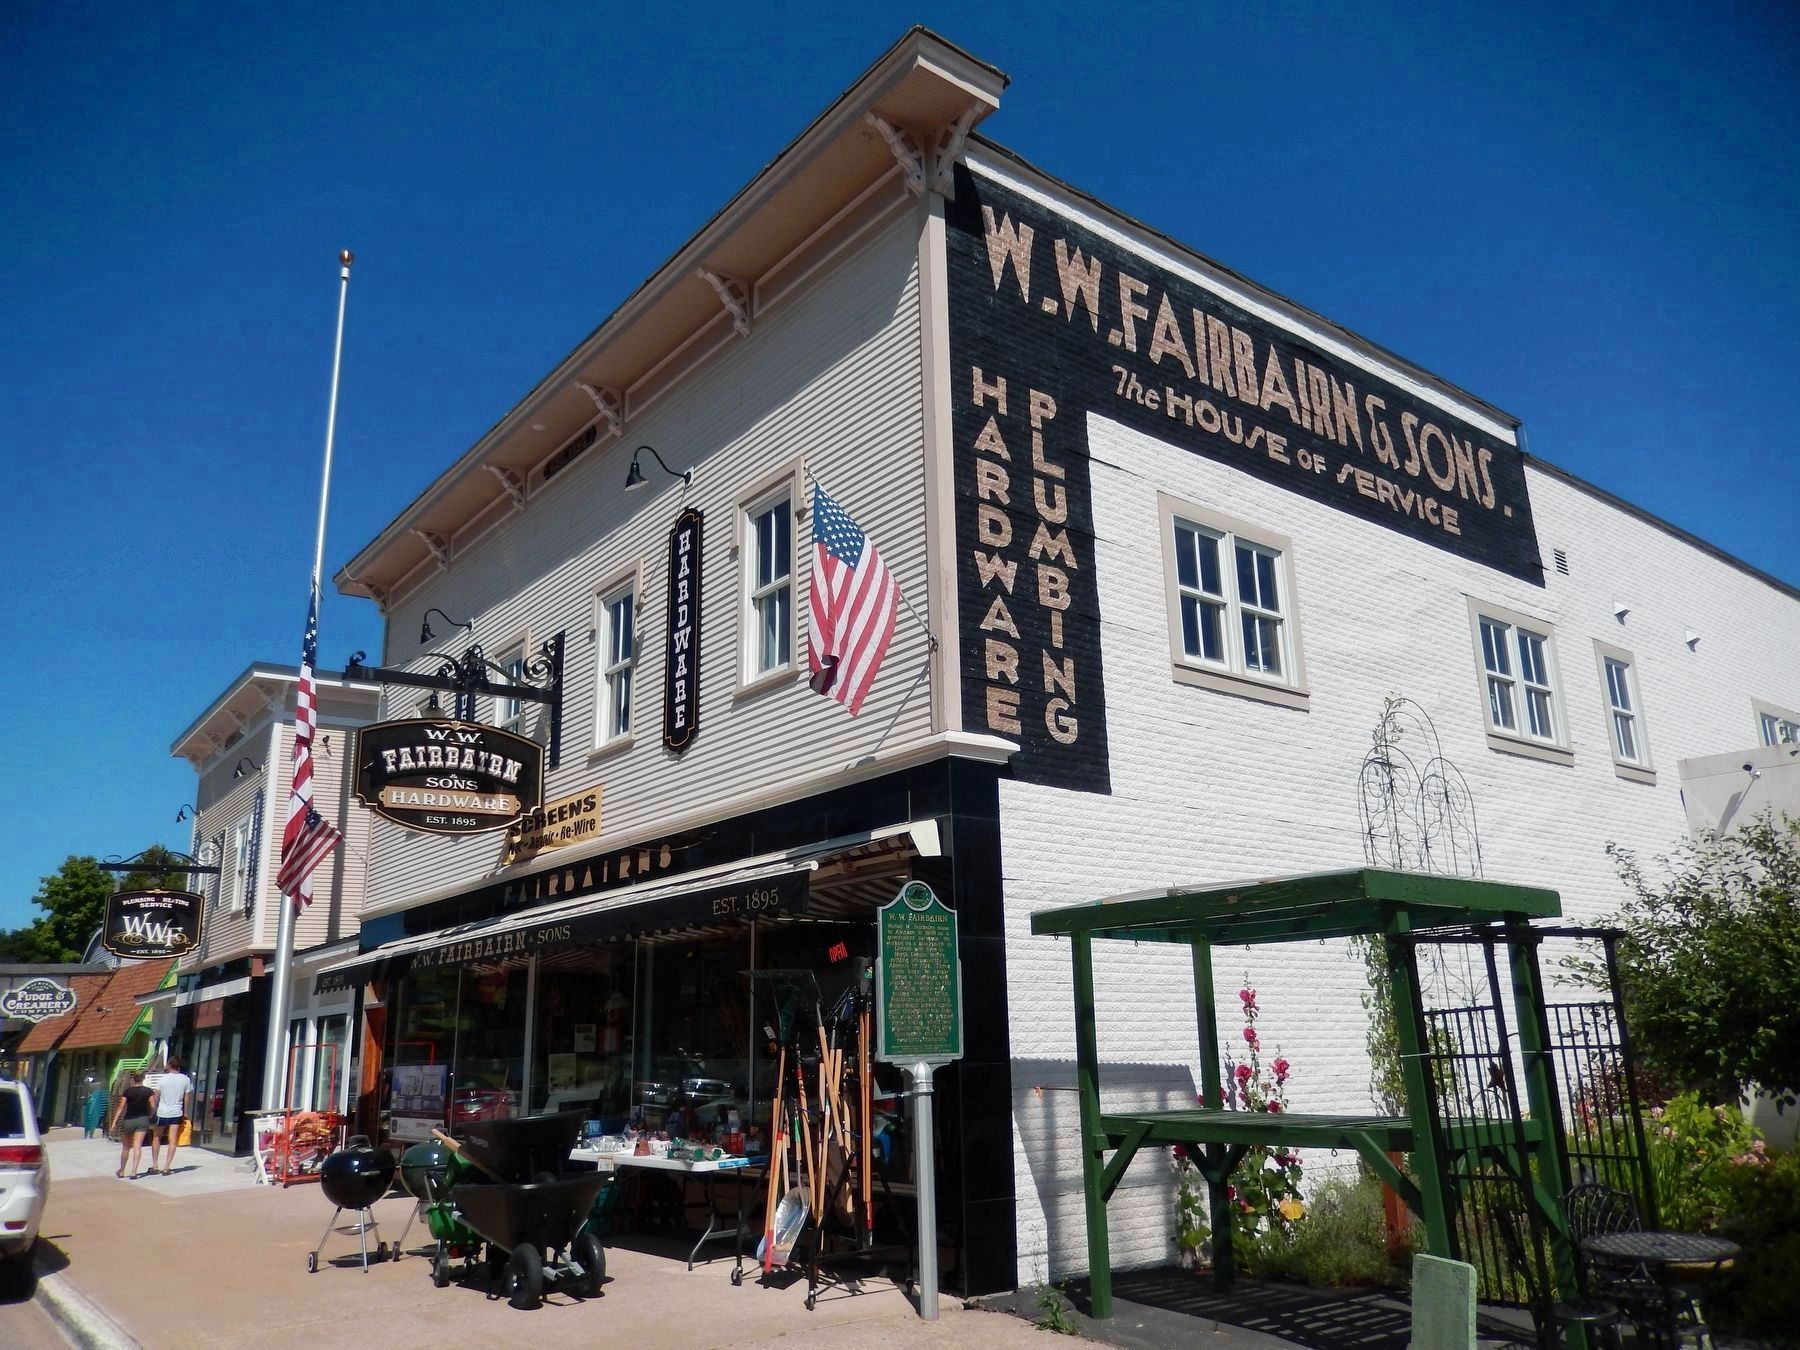 W. W. Fairbairn Hardware Store (<b><i>marker visible at front corner</b></i>) image. Click for full size.